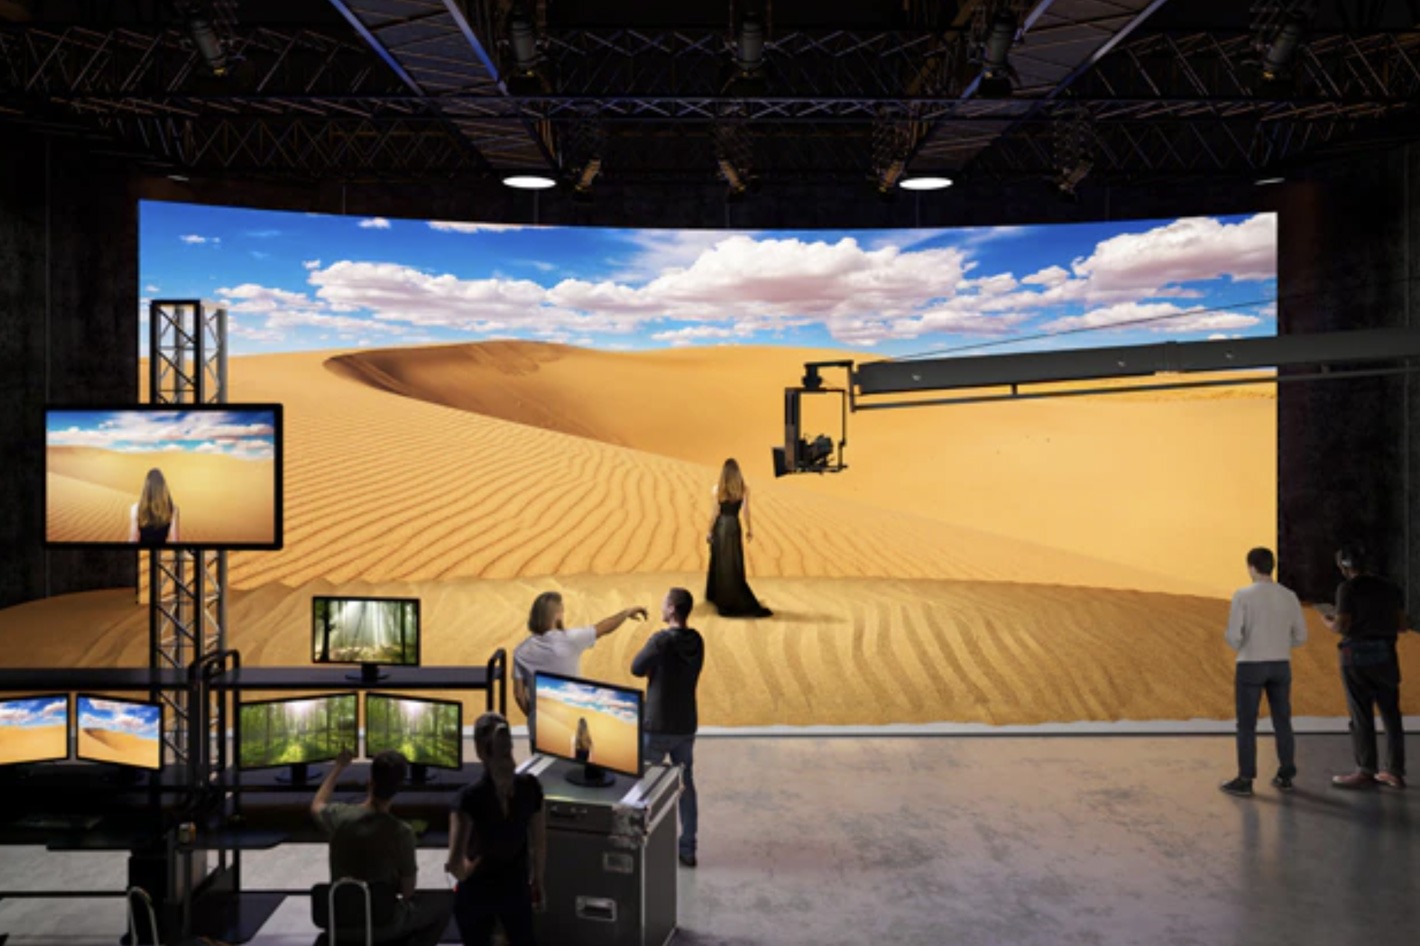 Sony at NAB: it’s all about Imaging, IP, Cloud and Visualization